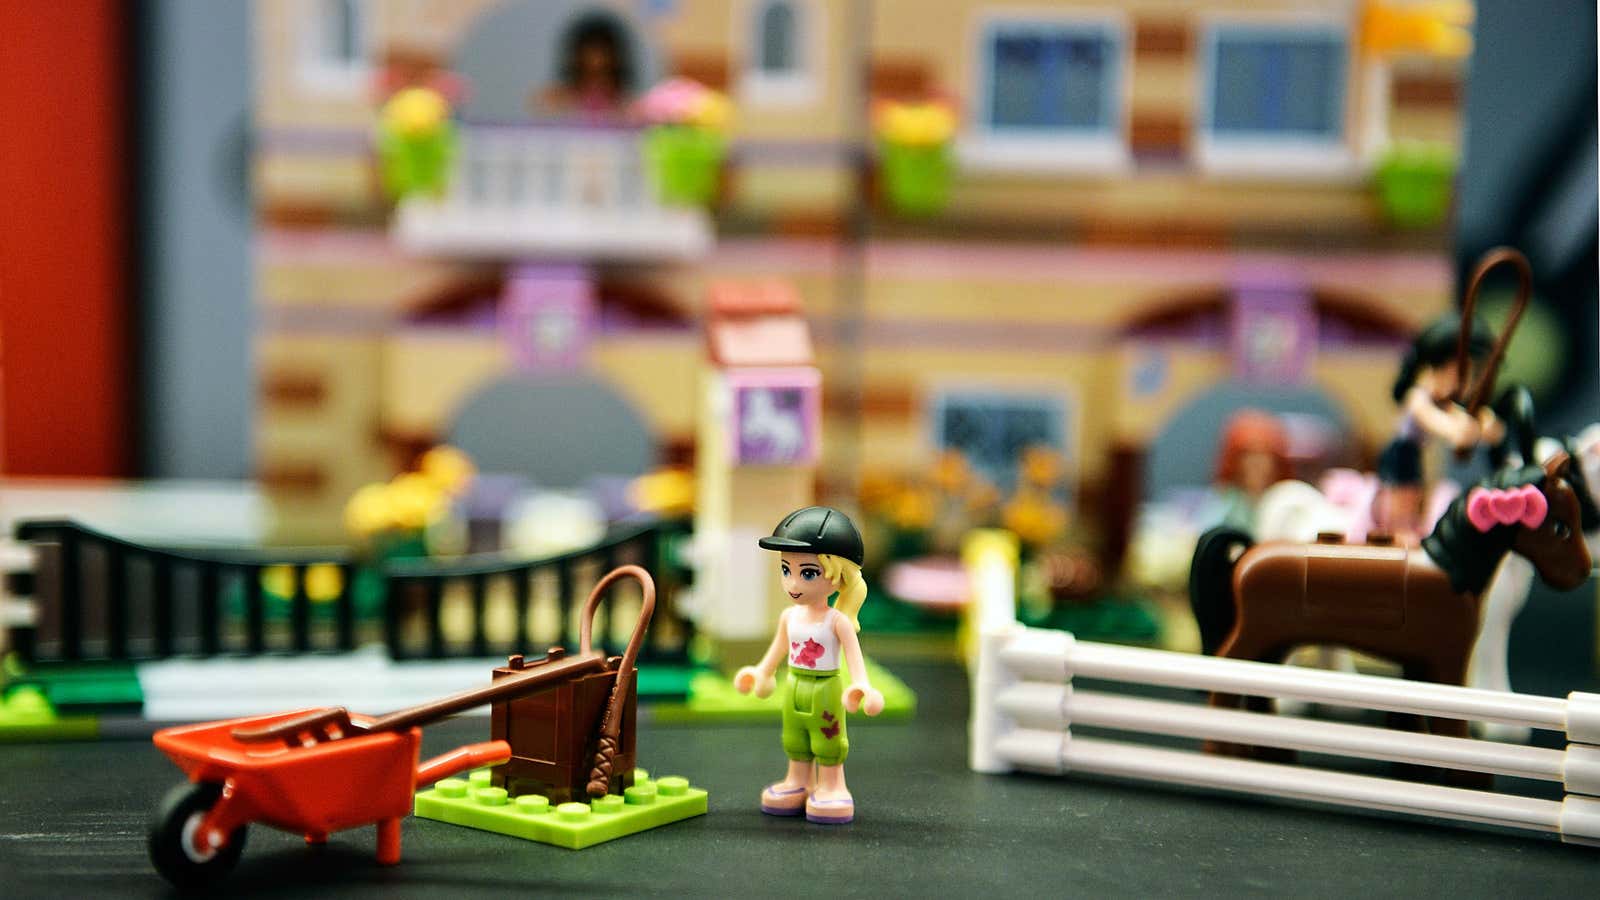 Lego Friends girl-centered line of Legos stirred controversy upon their release in 2011.